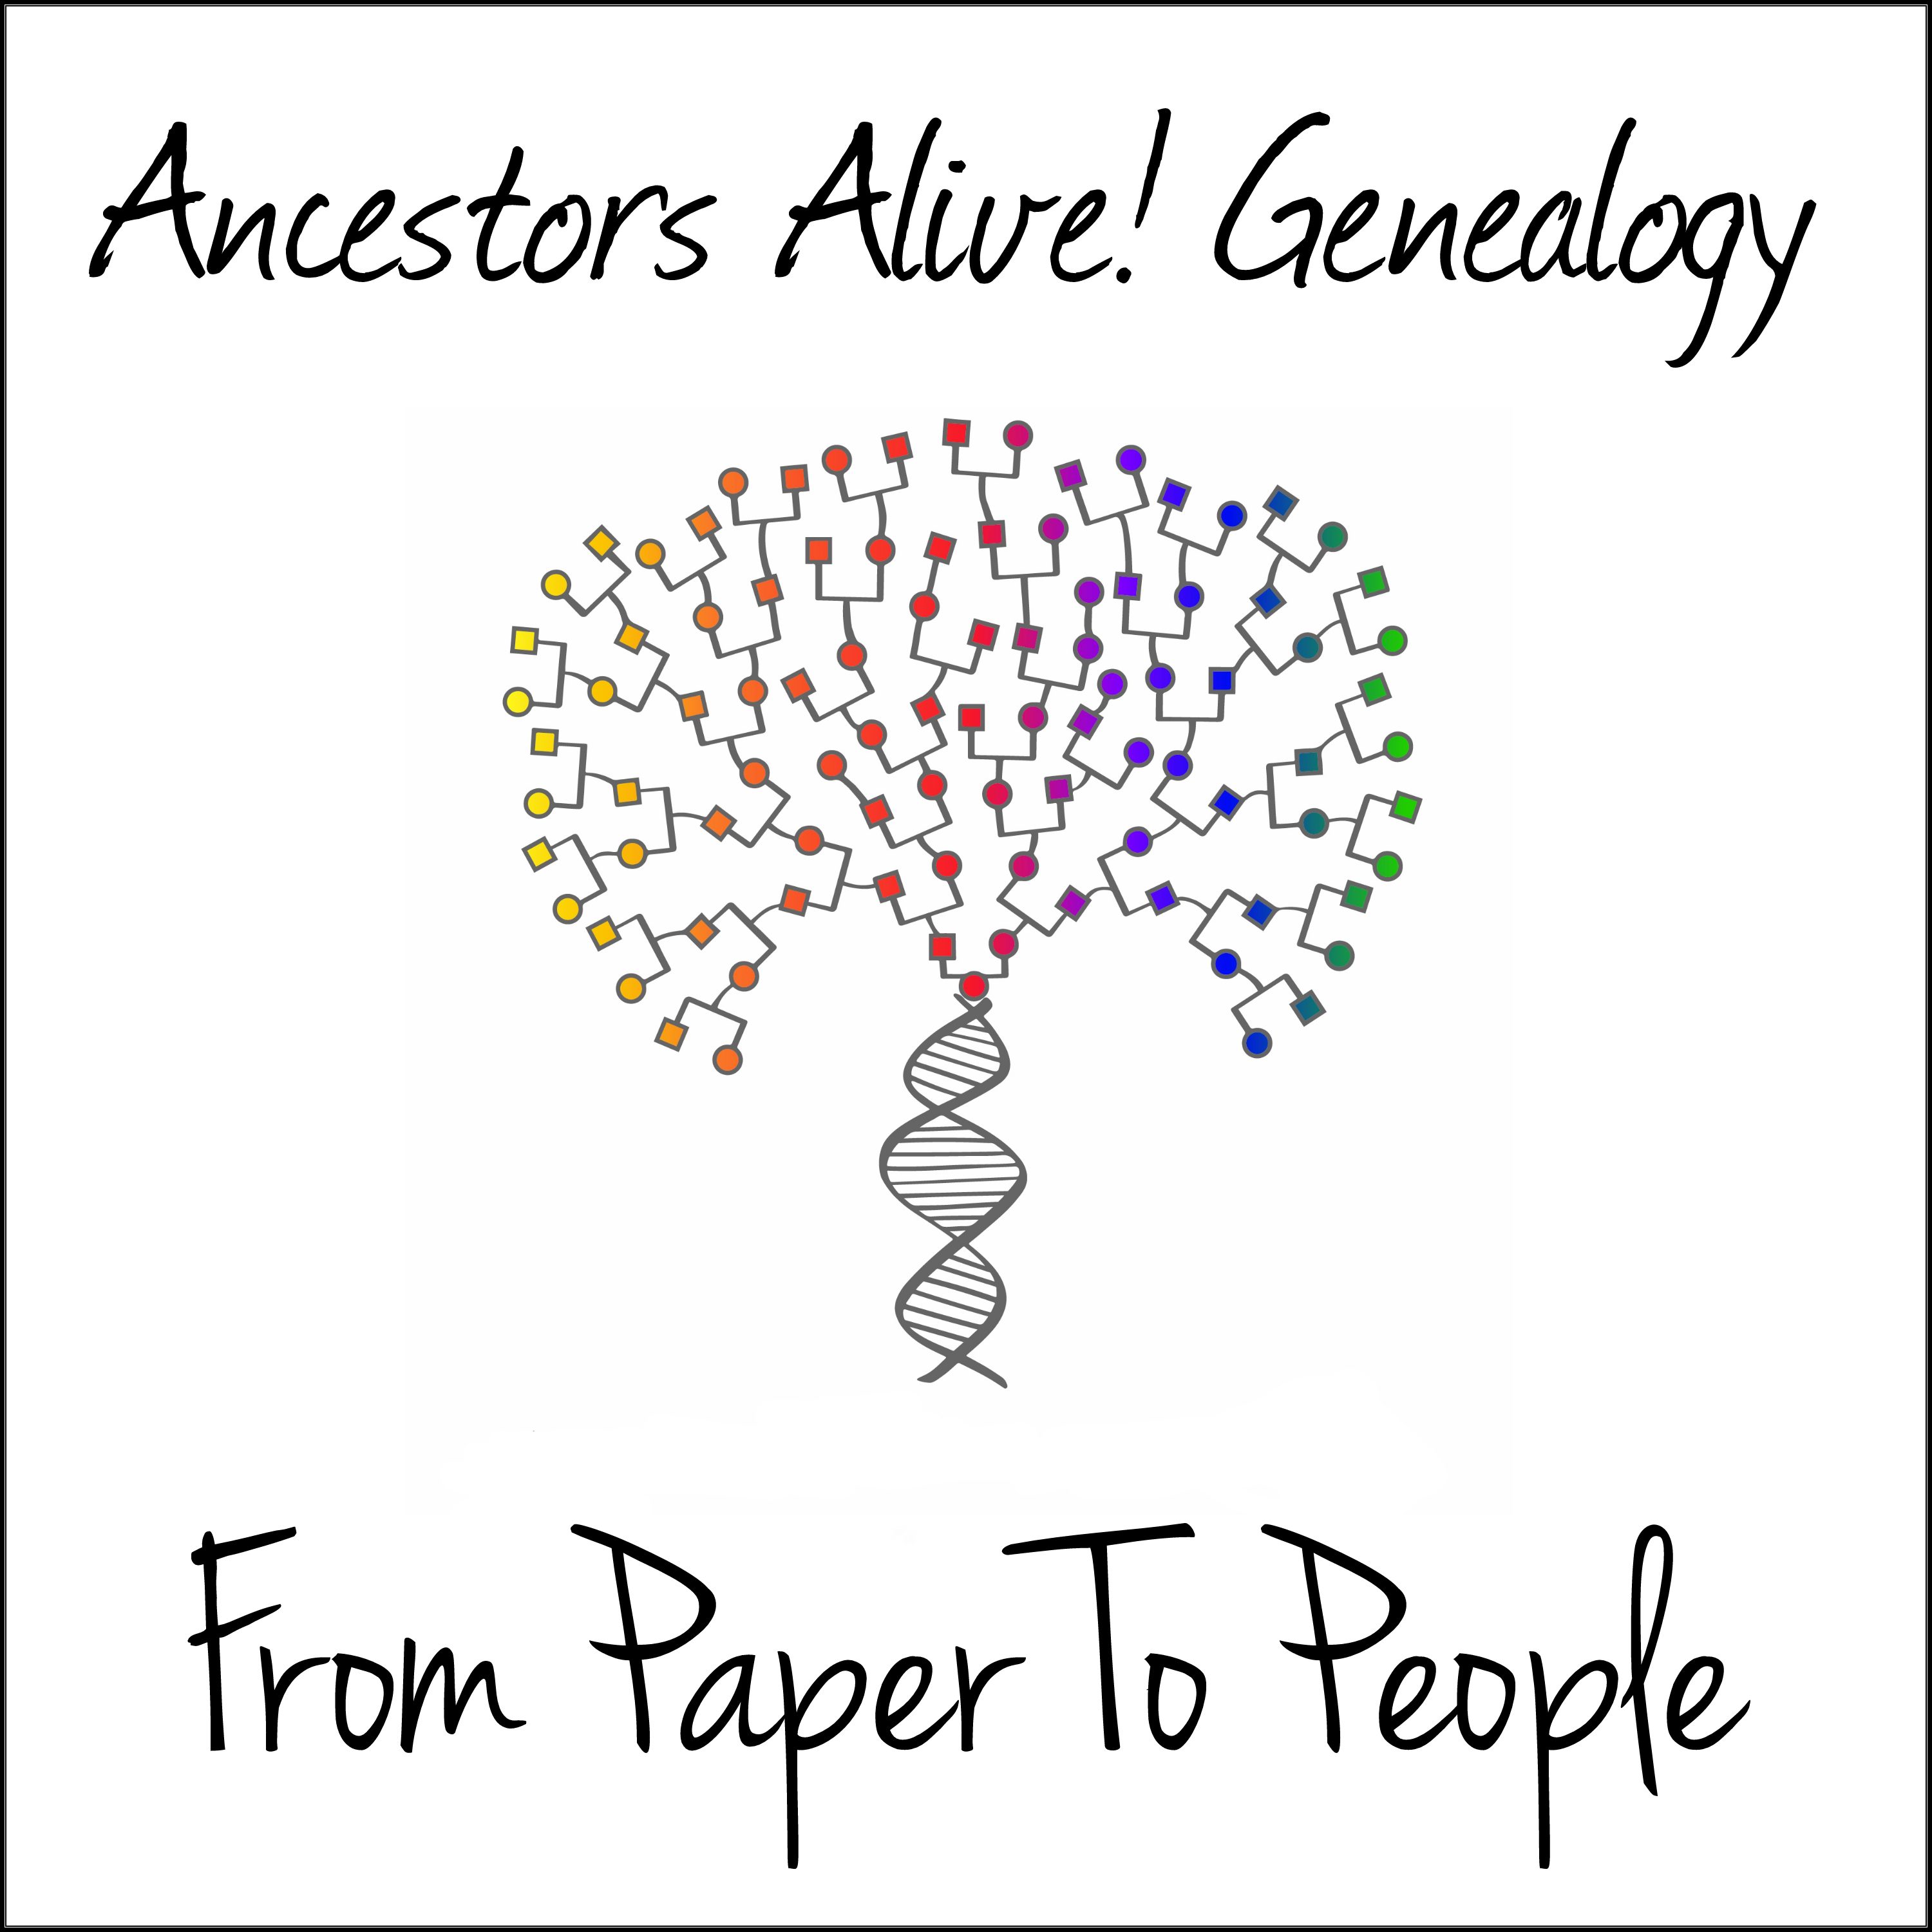 Logo is a rainbow tree with a double helix trunk. Written above and below are the titles: Ancestors Alive! Genealogy and From Paper To People